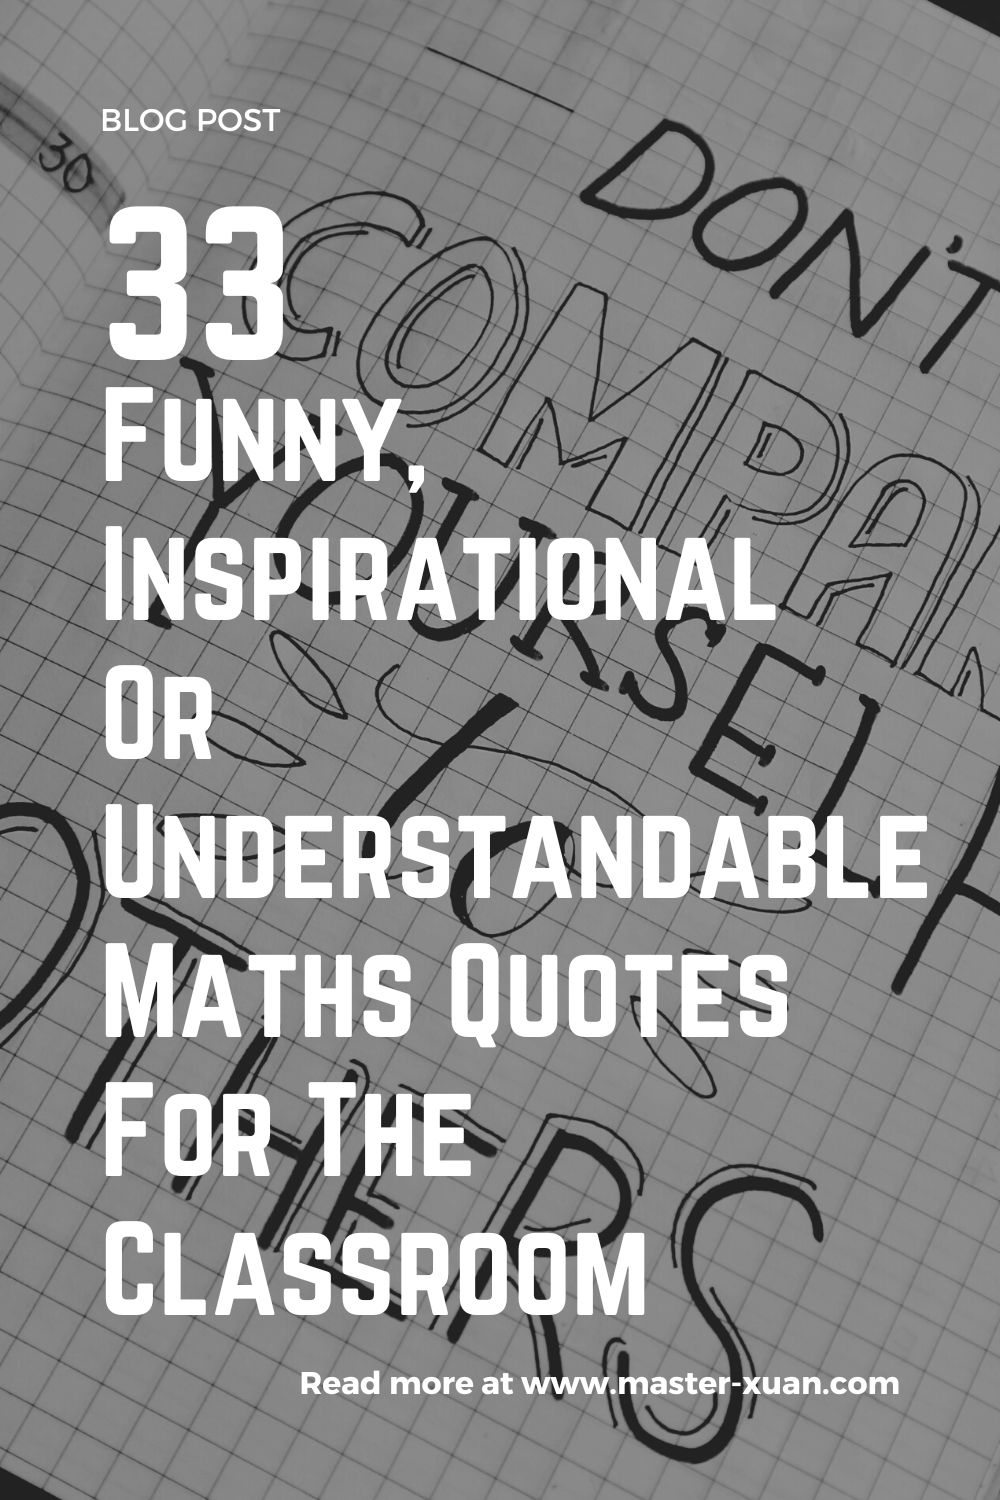 33 inspirational maths quotes for the classroom